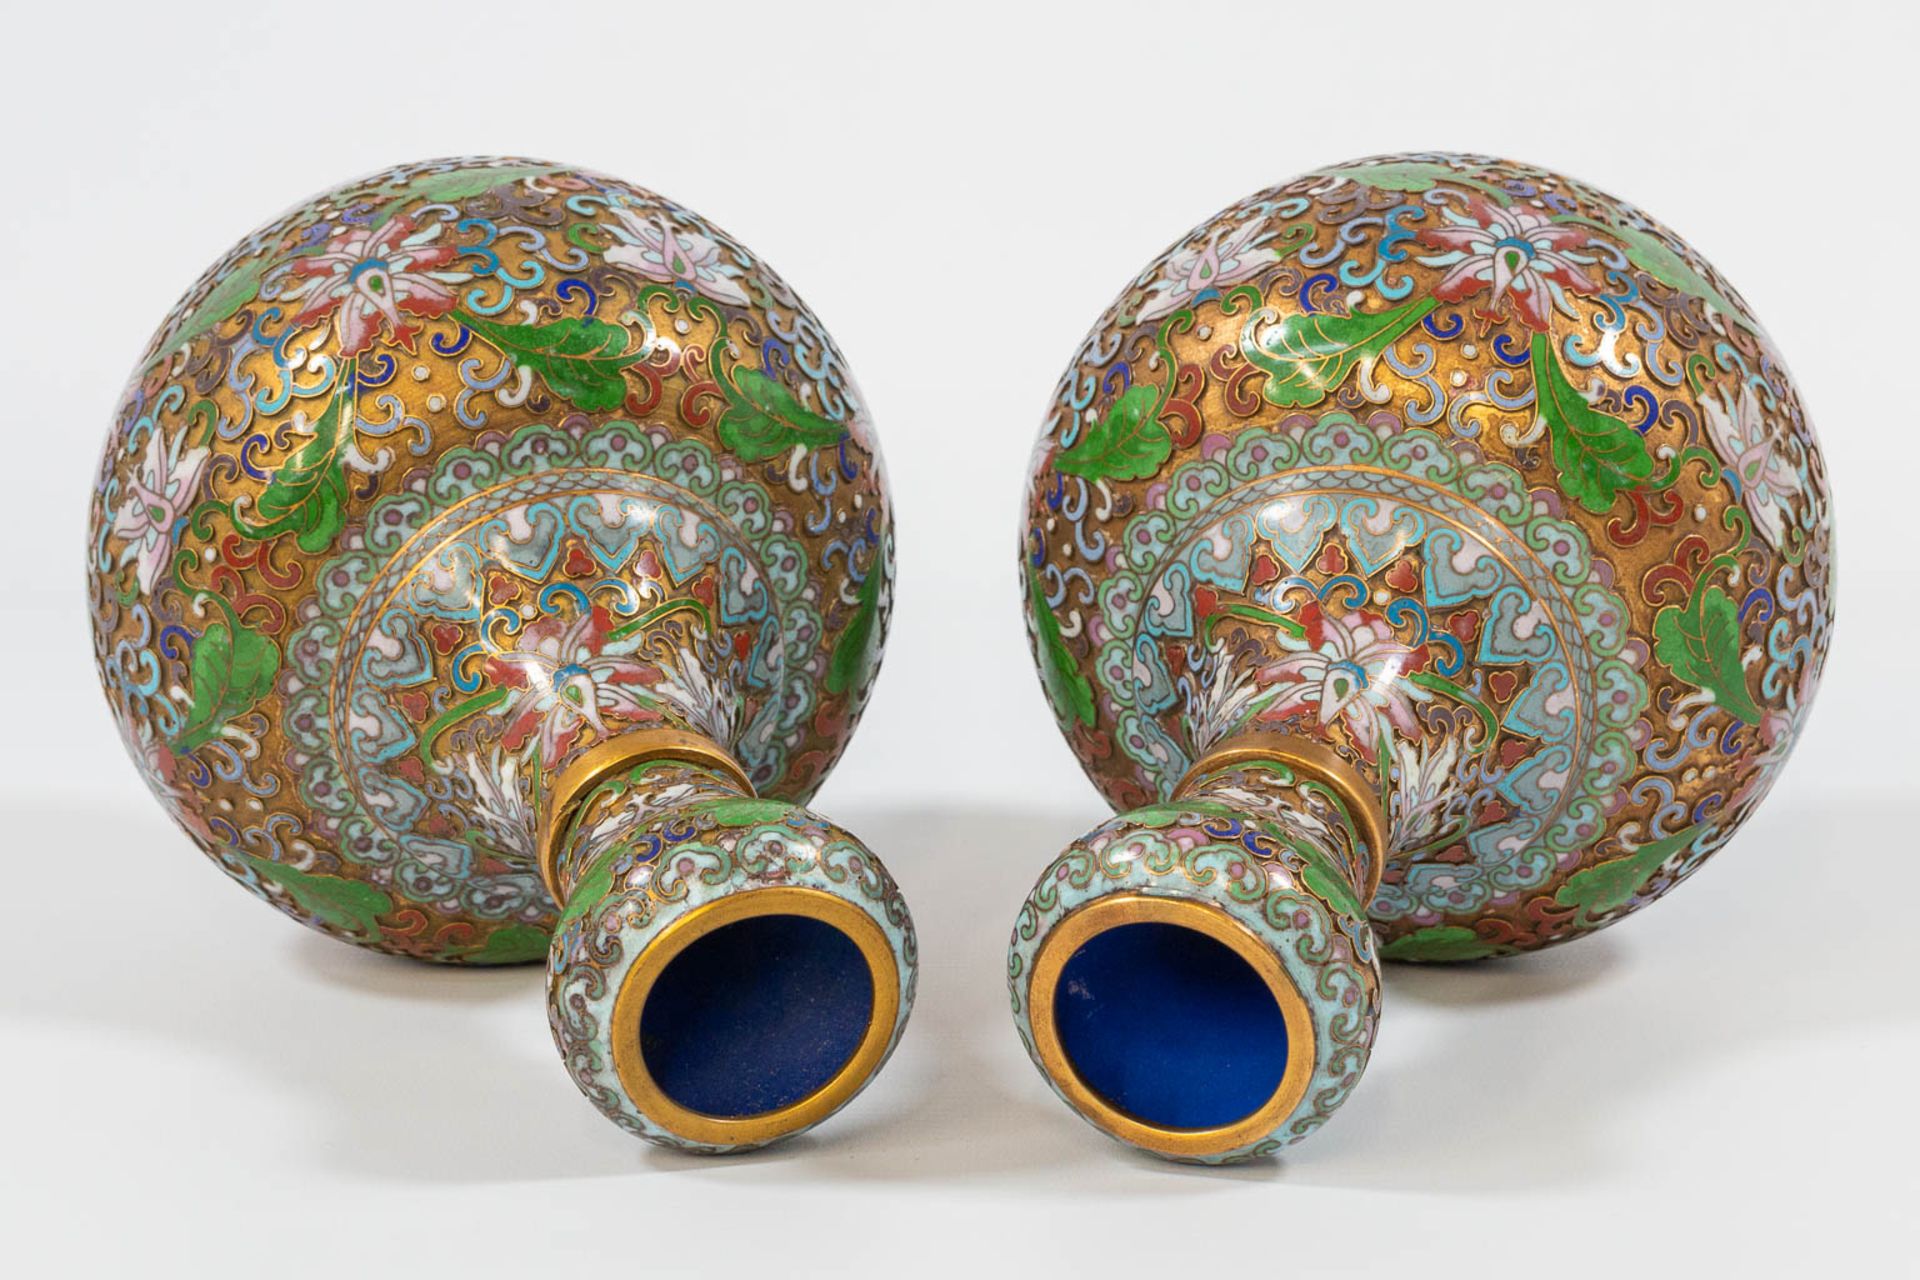 A pair of openworked Cloisonné vases, made of Bronze and enamel. - Image 15 of 17